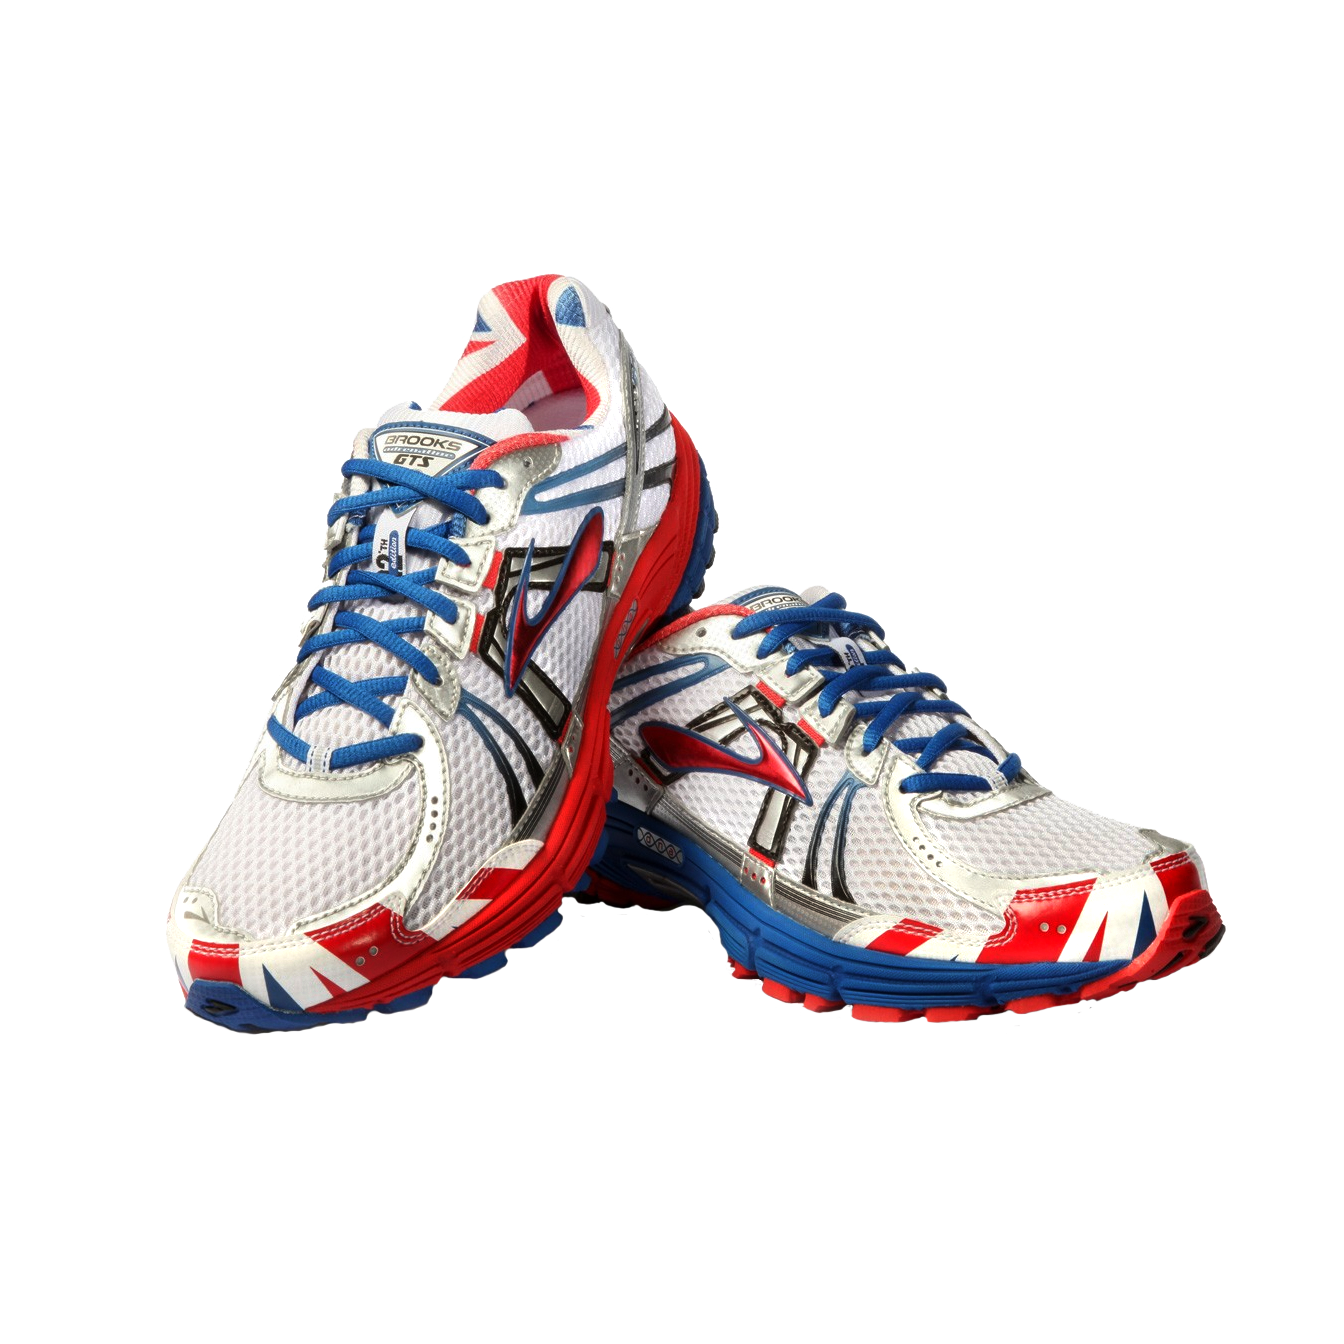 Sneakers PNG High Definition Photo Image pngteam.com